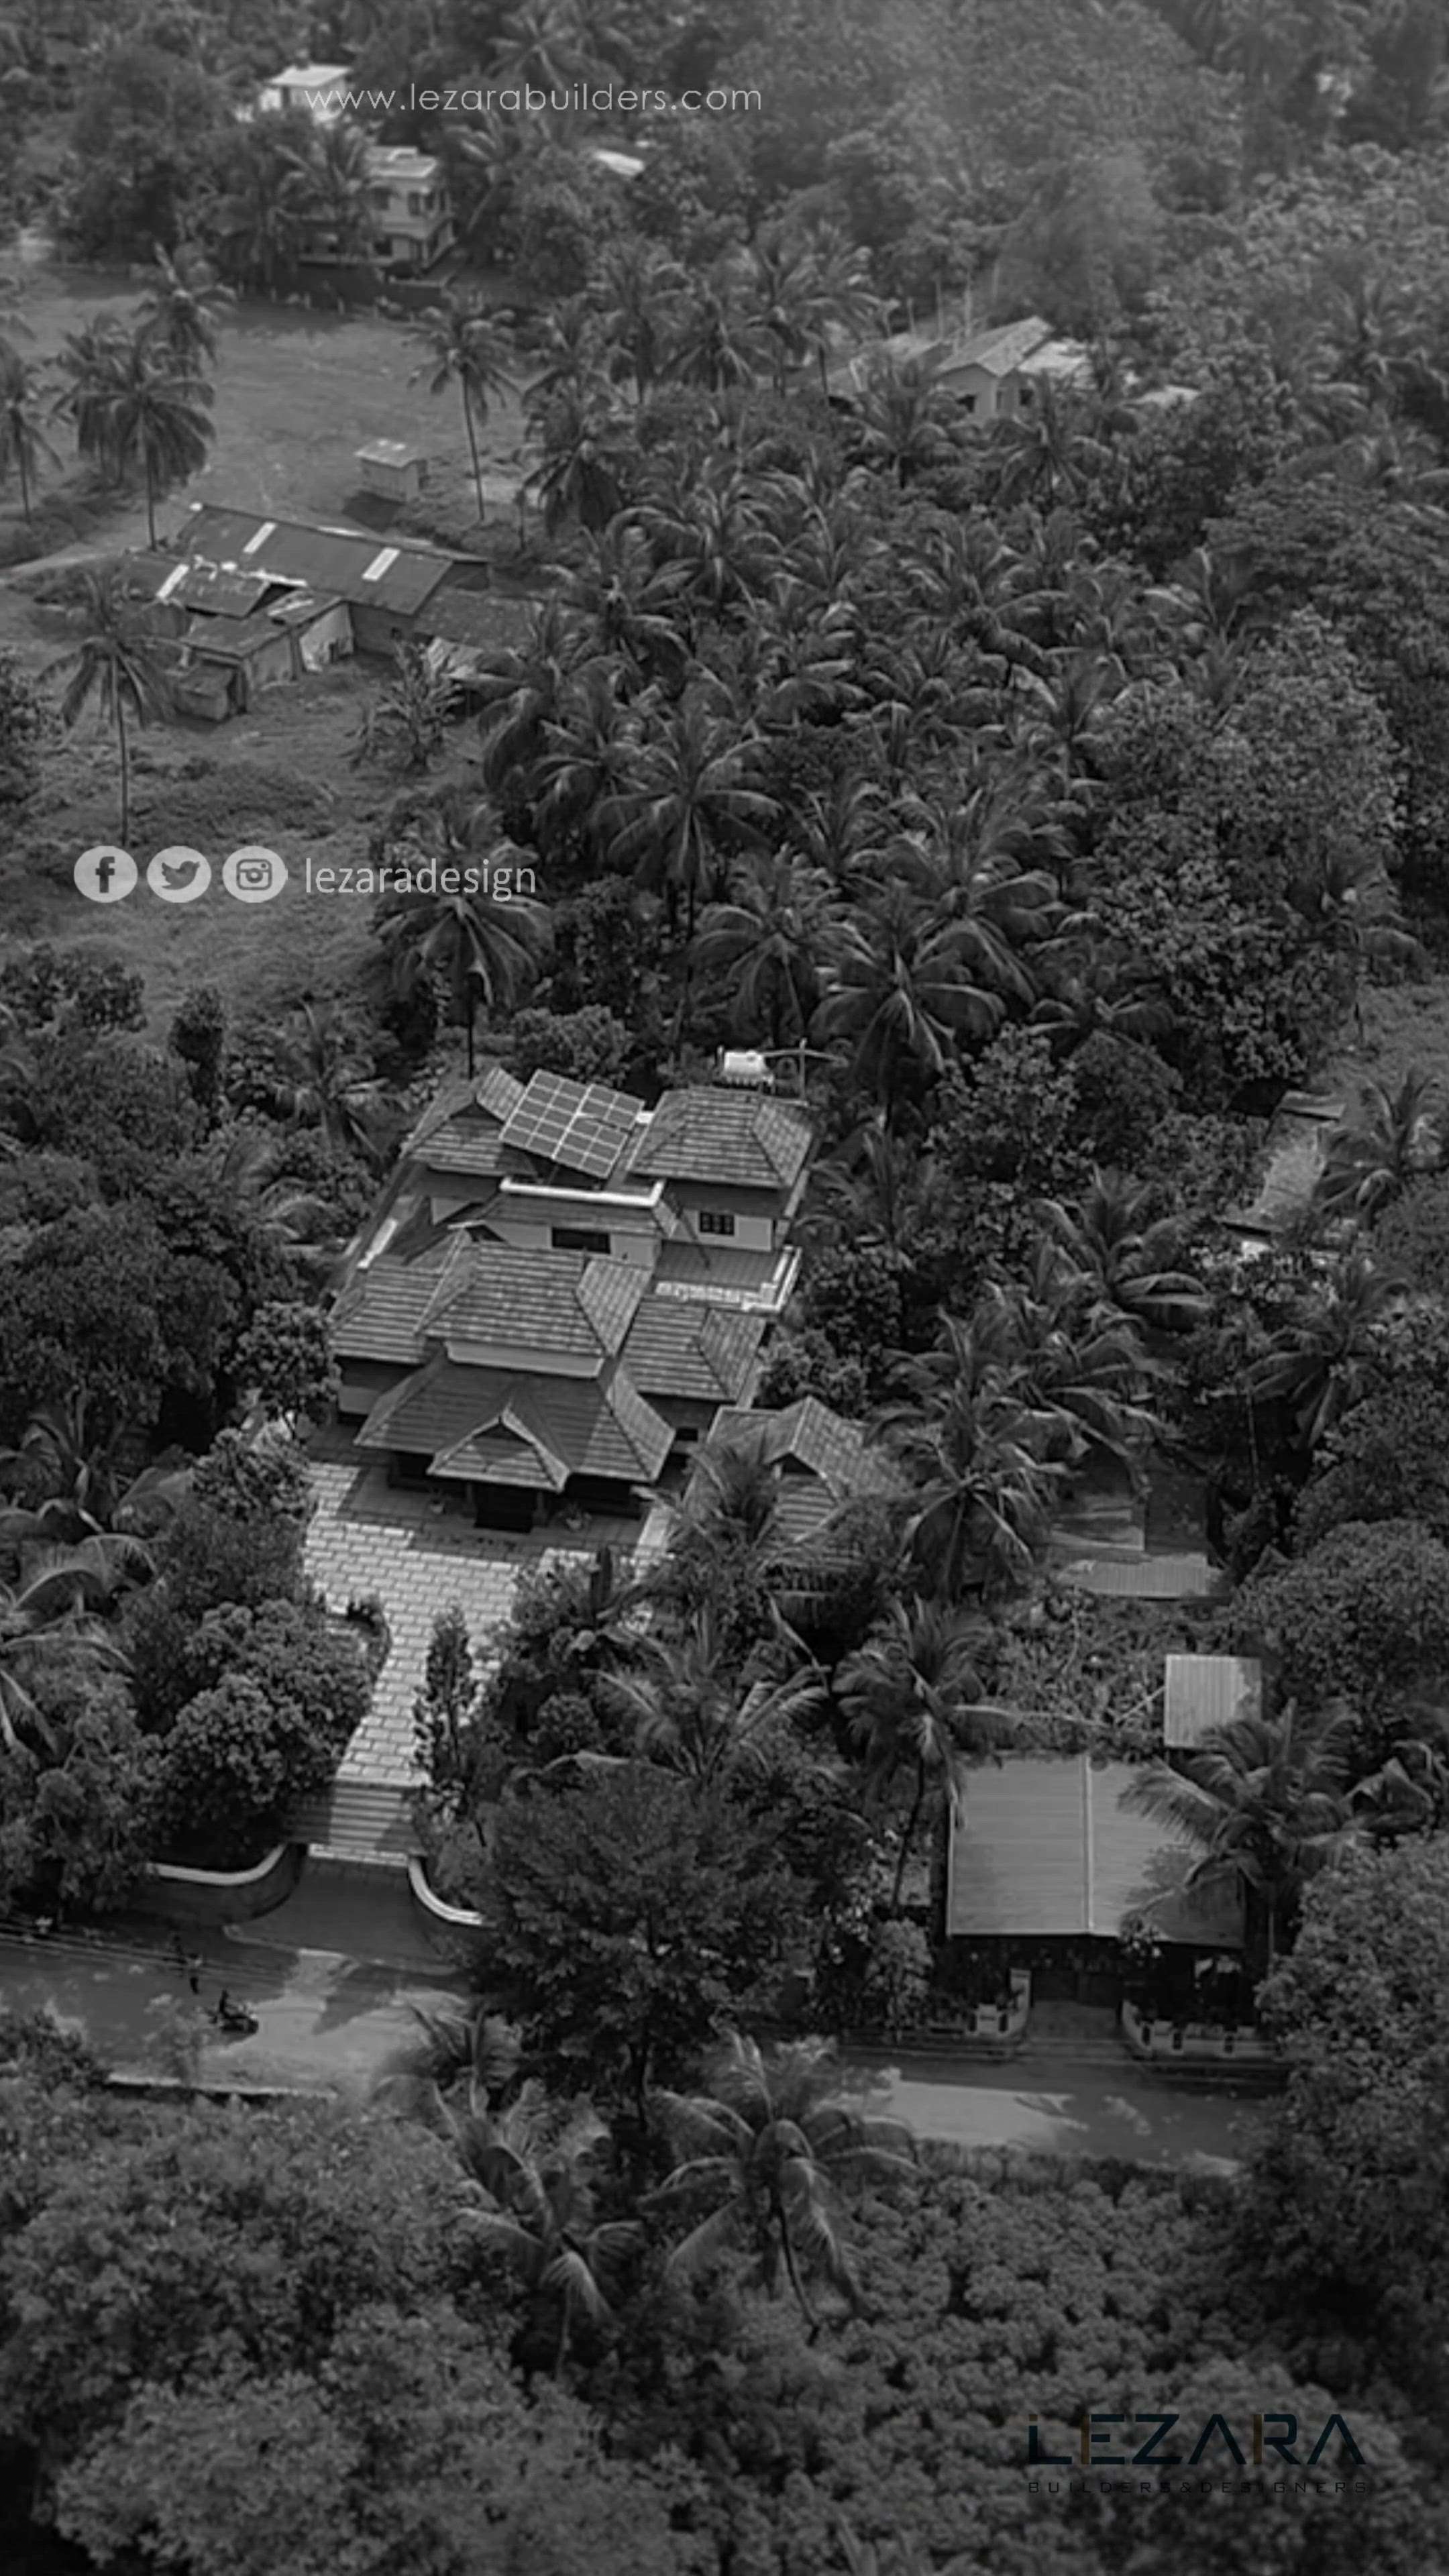 Kerala traditional homes are a prominent architectural style found in the state of Kerala, India. These homes are characterized by their unique design, which incorporates elements of traditional Kerala culture and climate considerations.

In recent years, there has been a growing interest in preserving and promoting traditional Kerala architecture, and many modern homes draw inspiration from these traditional designs while incorporating contemporary elements. These homes offer a glimpse into Kerala's rich cultural heritage and are a testament to the state's architectural ingenuity.

www.lezarabuilders.com
tolezara@gmail.com
+91 085930 72999 

#keralahomedesign #architecture #keralahomes #instagood #lezaradesign #lezara #tropicaldesign #archilovers #instagram  #homedesign #keralagram #keralaarchitecture #bhramayugam#nalukettveddu #KeralaStyleHouse #Architectural&nterior #lezaradesign #tharavadu